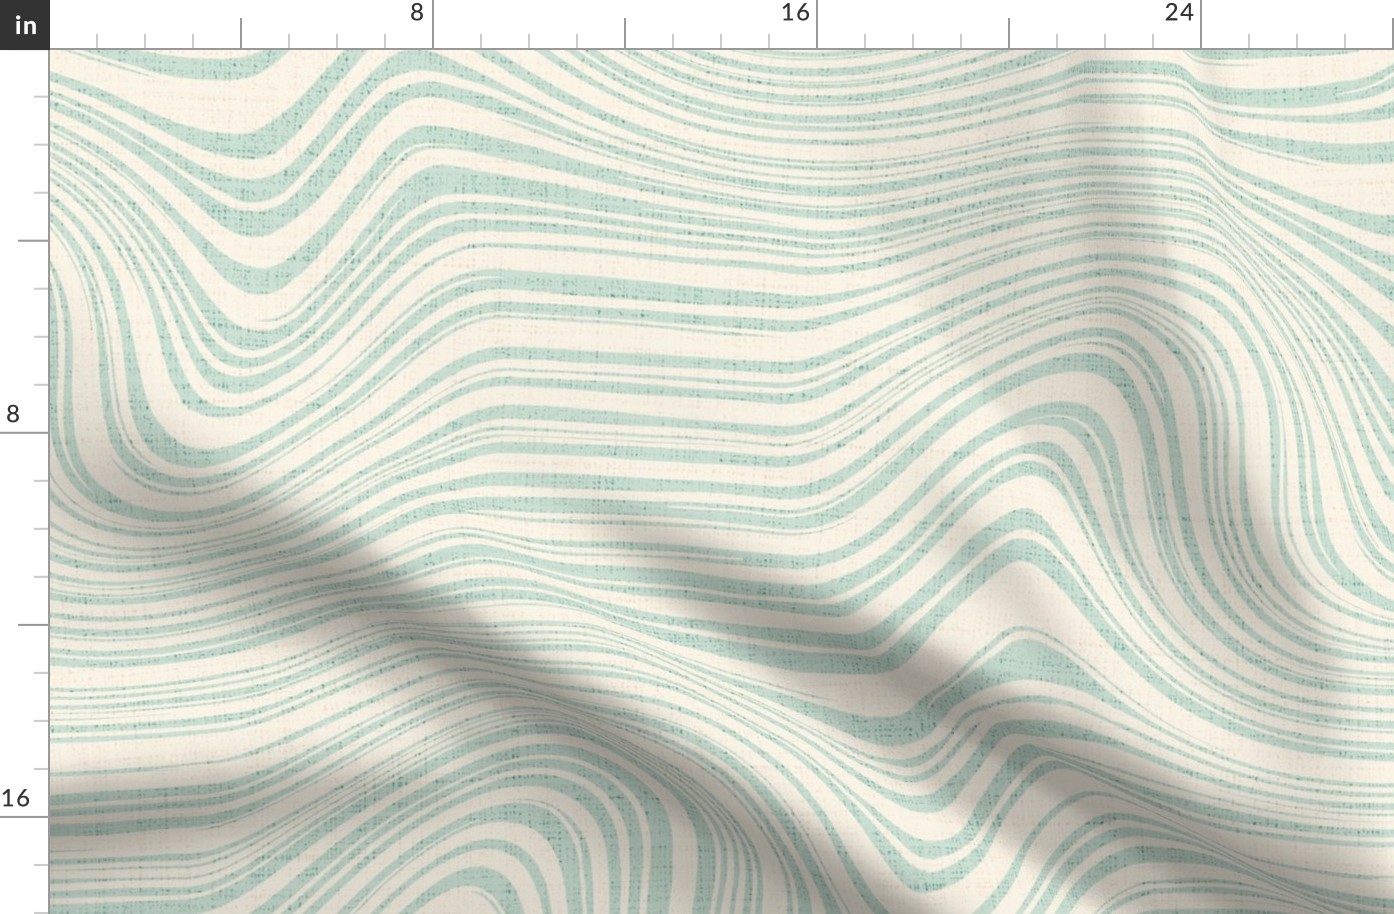 swirling stripes hand drawn-  cream and light pastel green - large scale